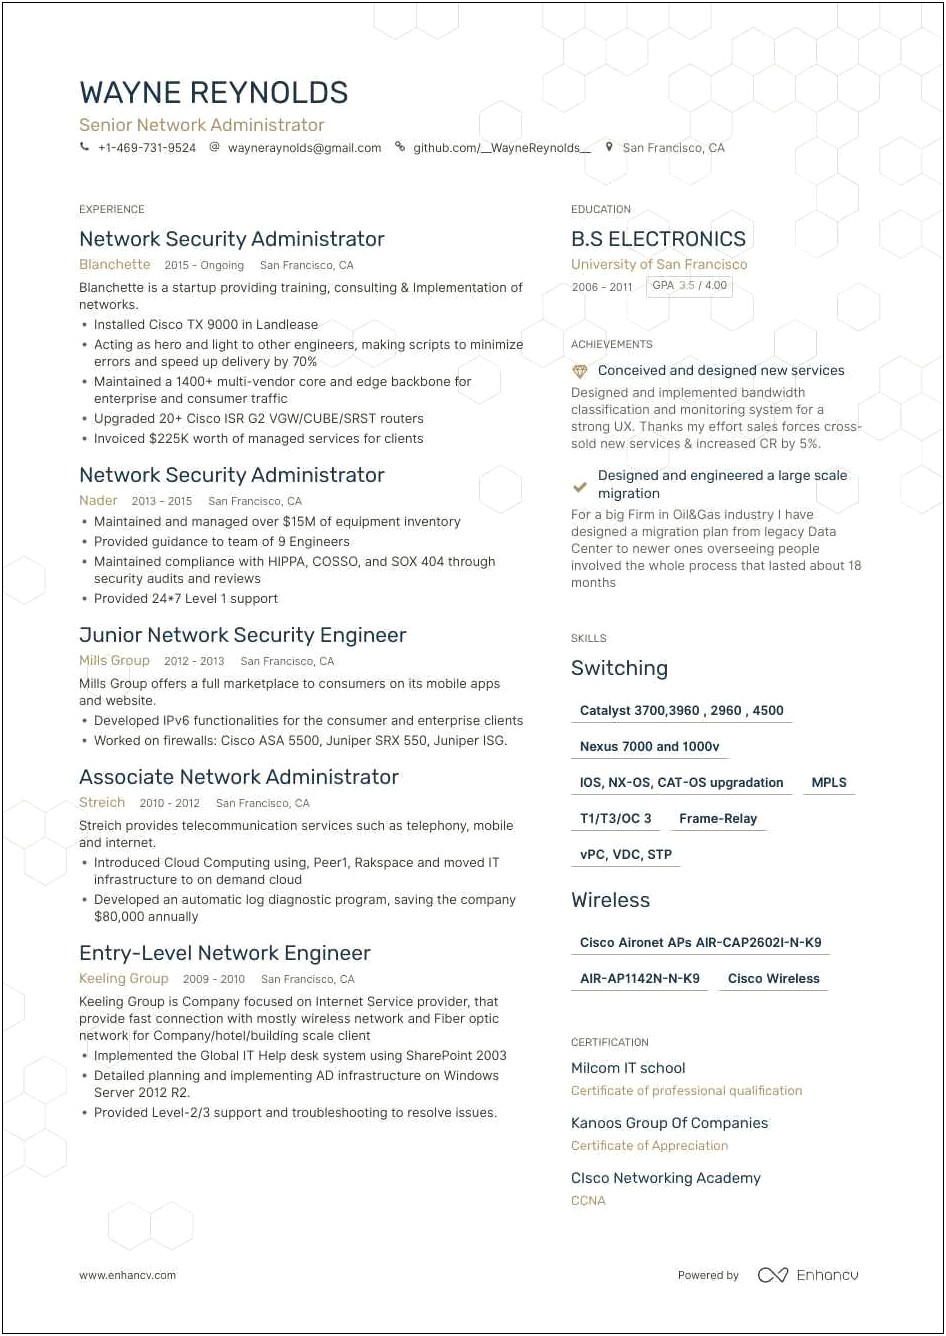 Resume Networking And Interview Skills